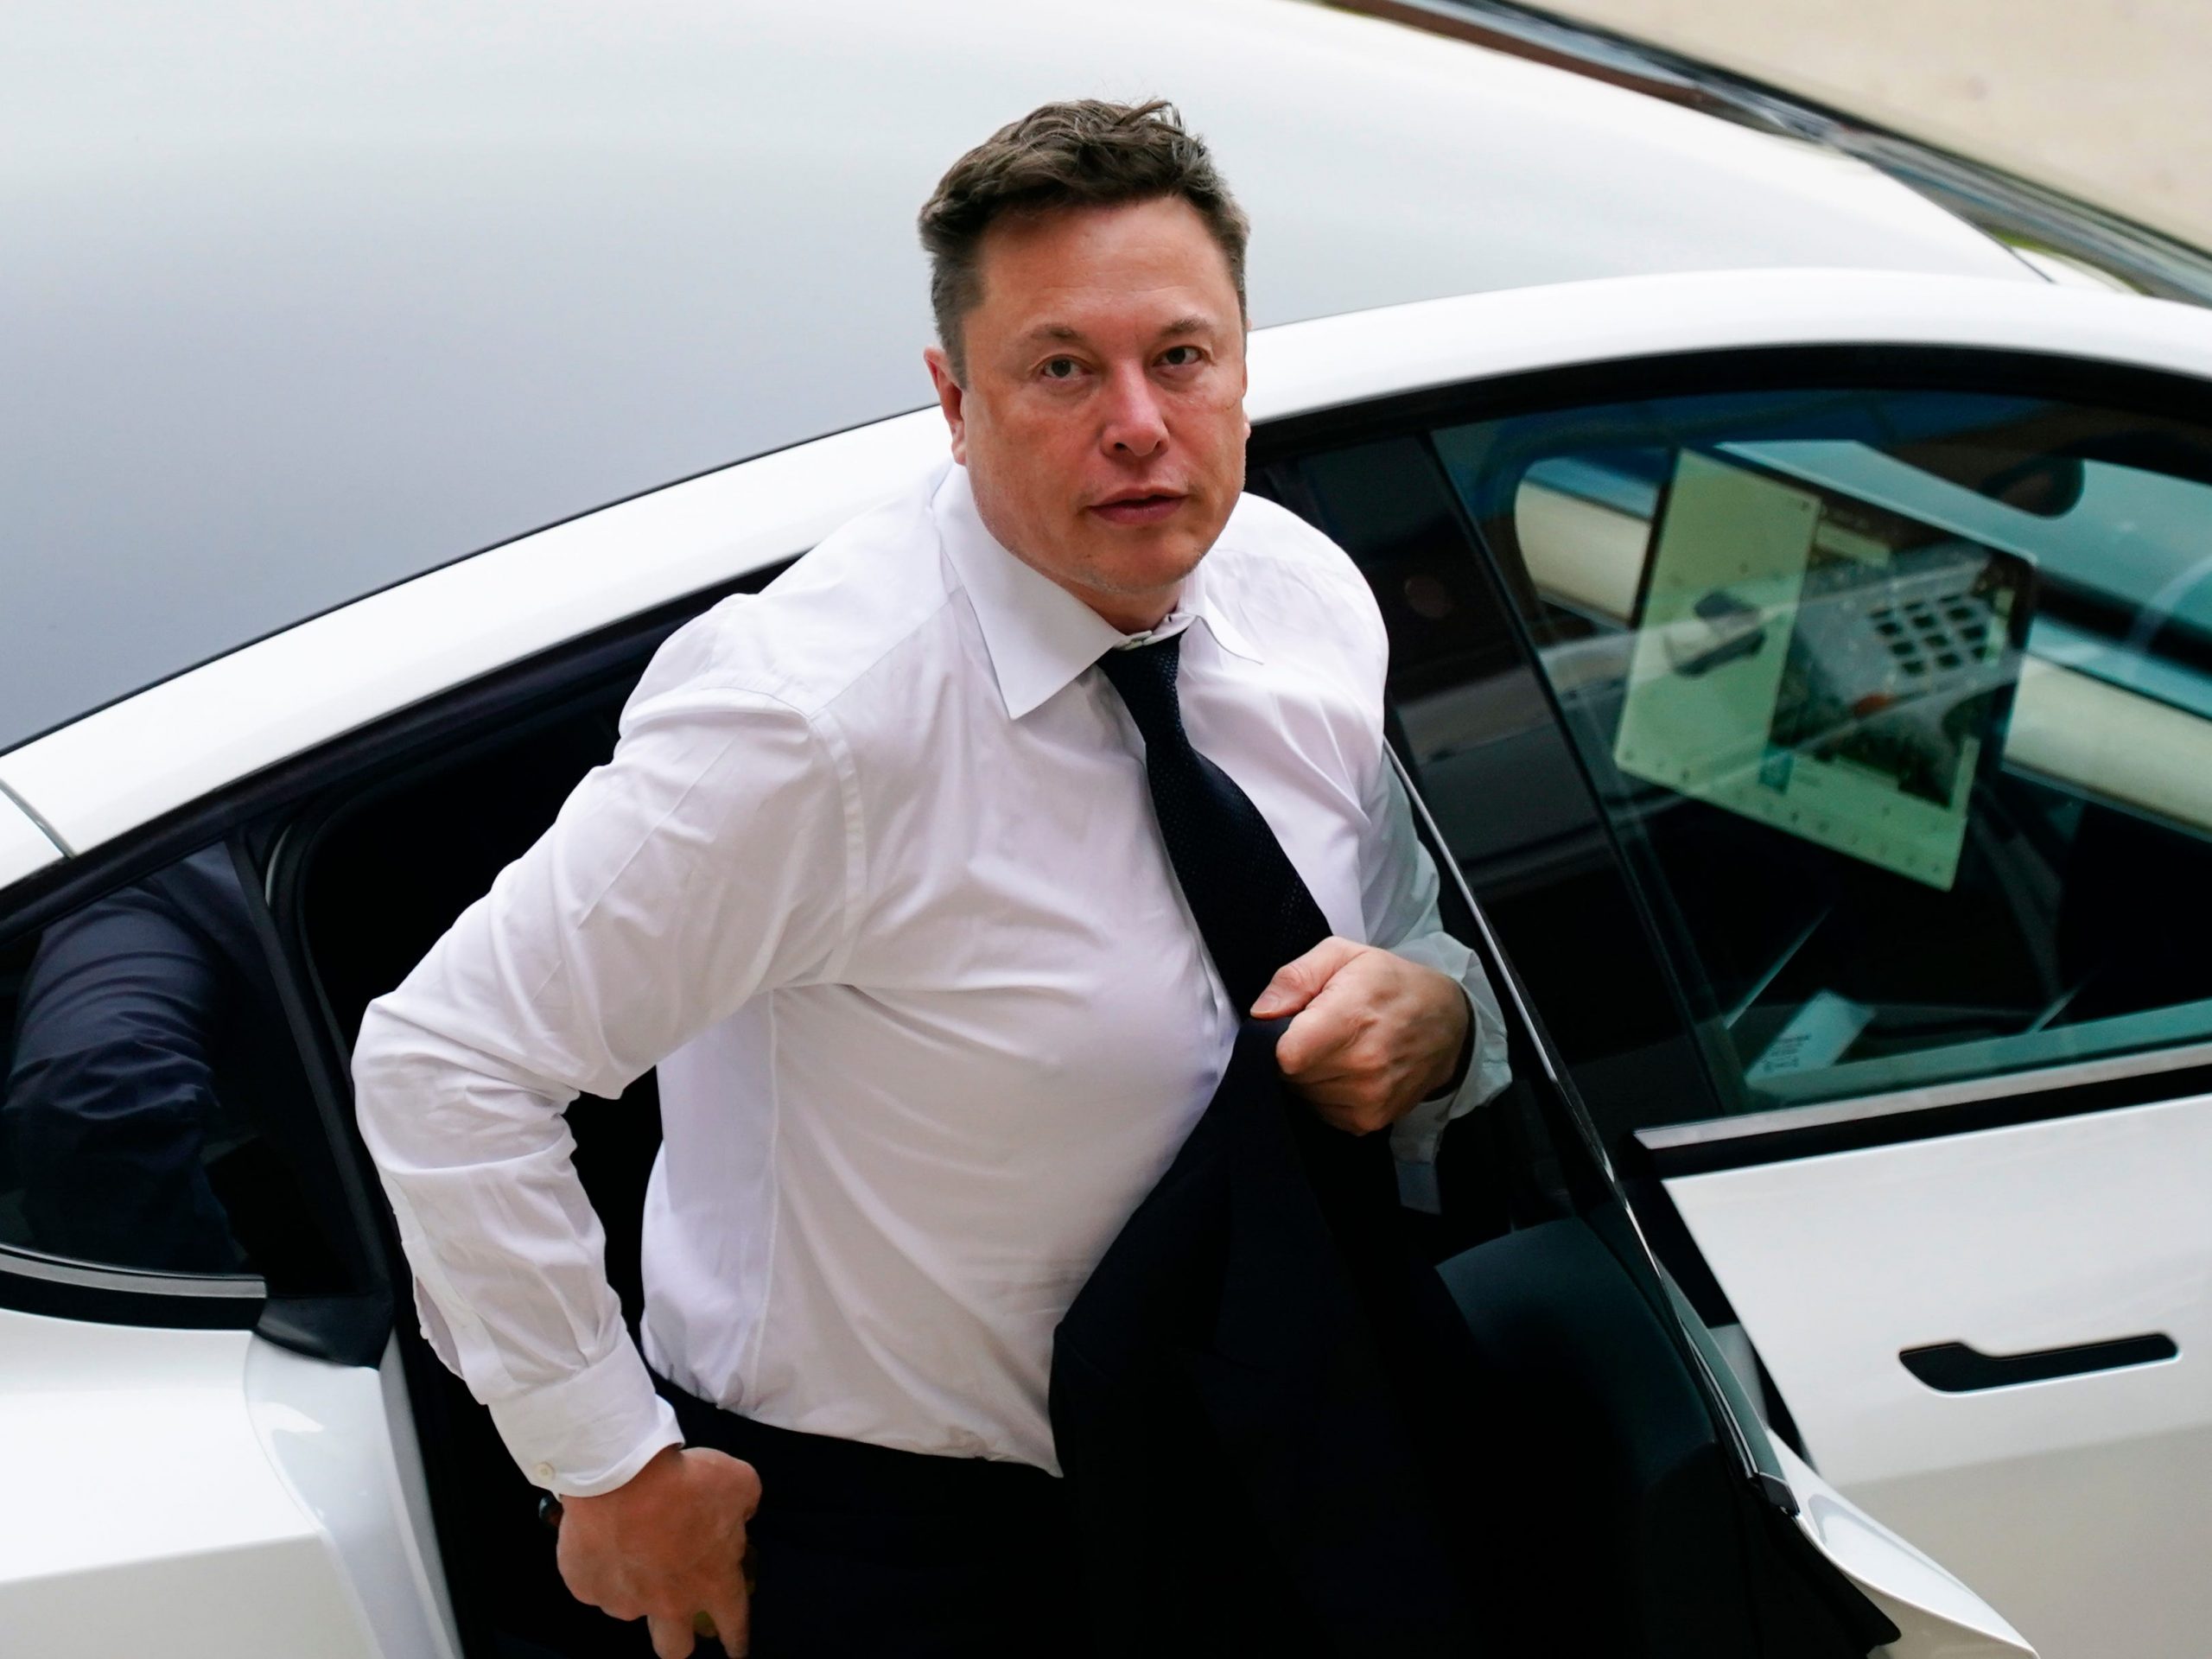 Tesla CEO Elon Musk stepping out of a silver Tesla wearing a white shirt and black tie on a sunny day